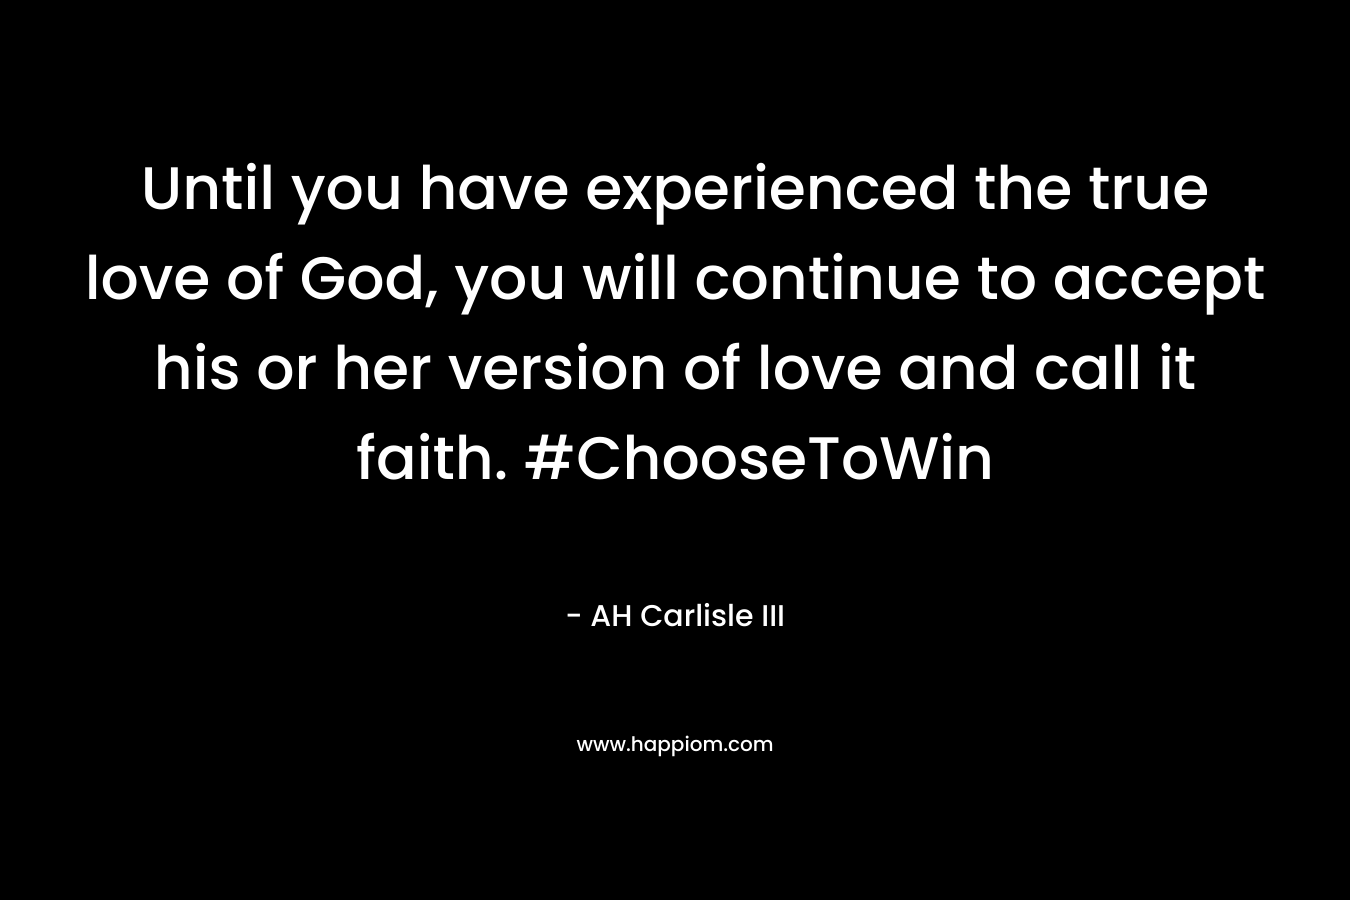 Until you have experienced the true love of God, you will continue to accept his or her version of love and call it faith. #ChooseToWin